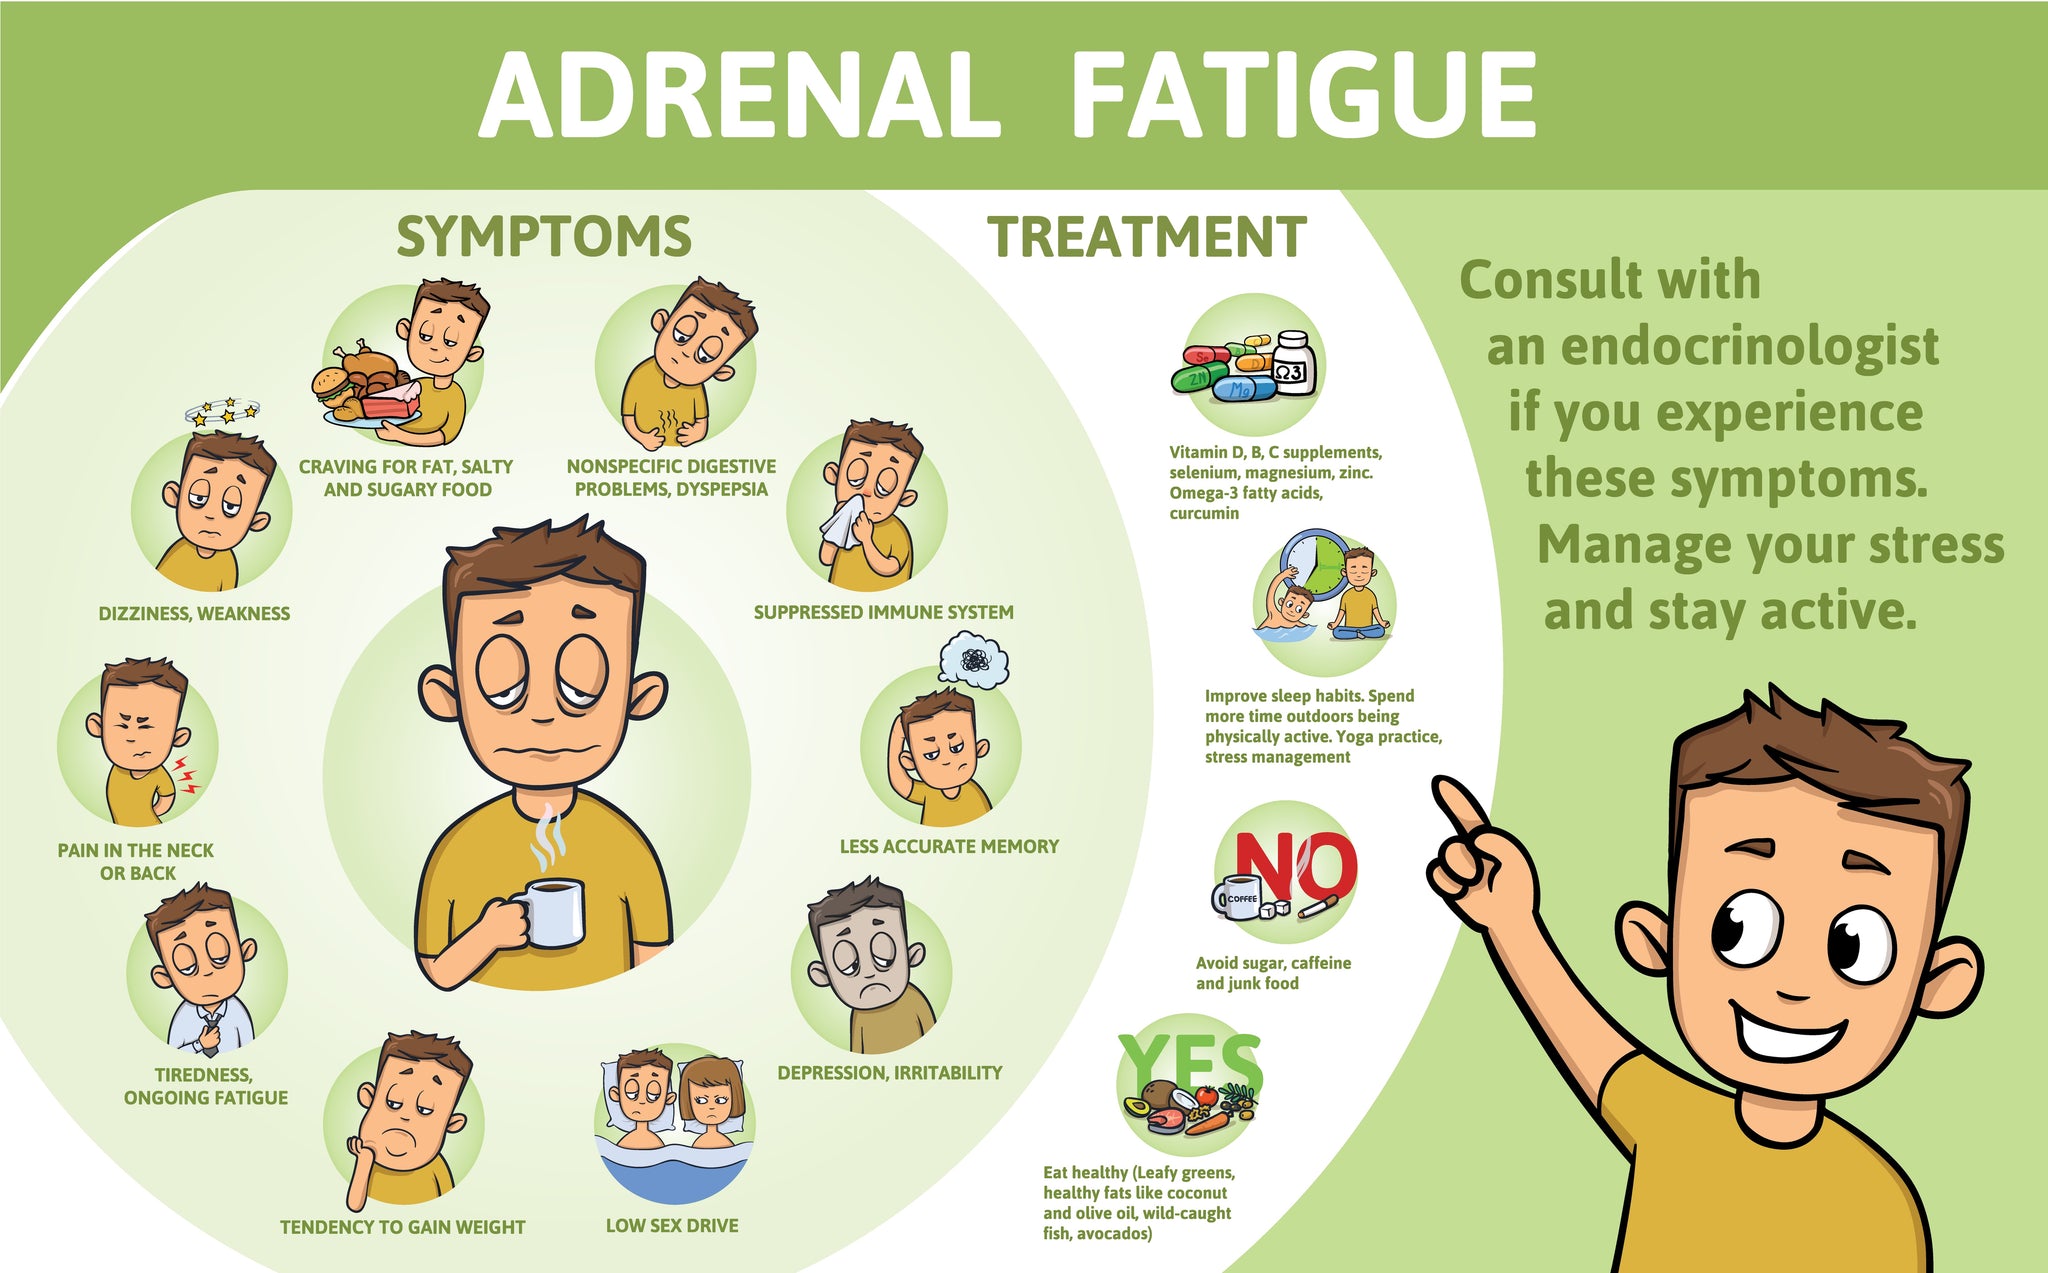 Adrenal Fatigue - Overcoming it Naturally